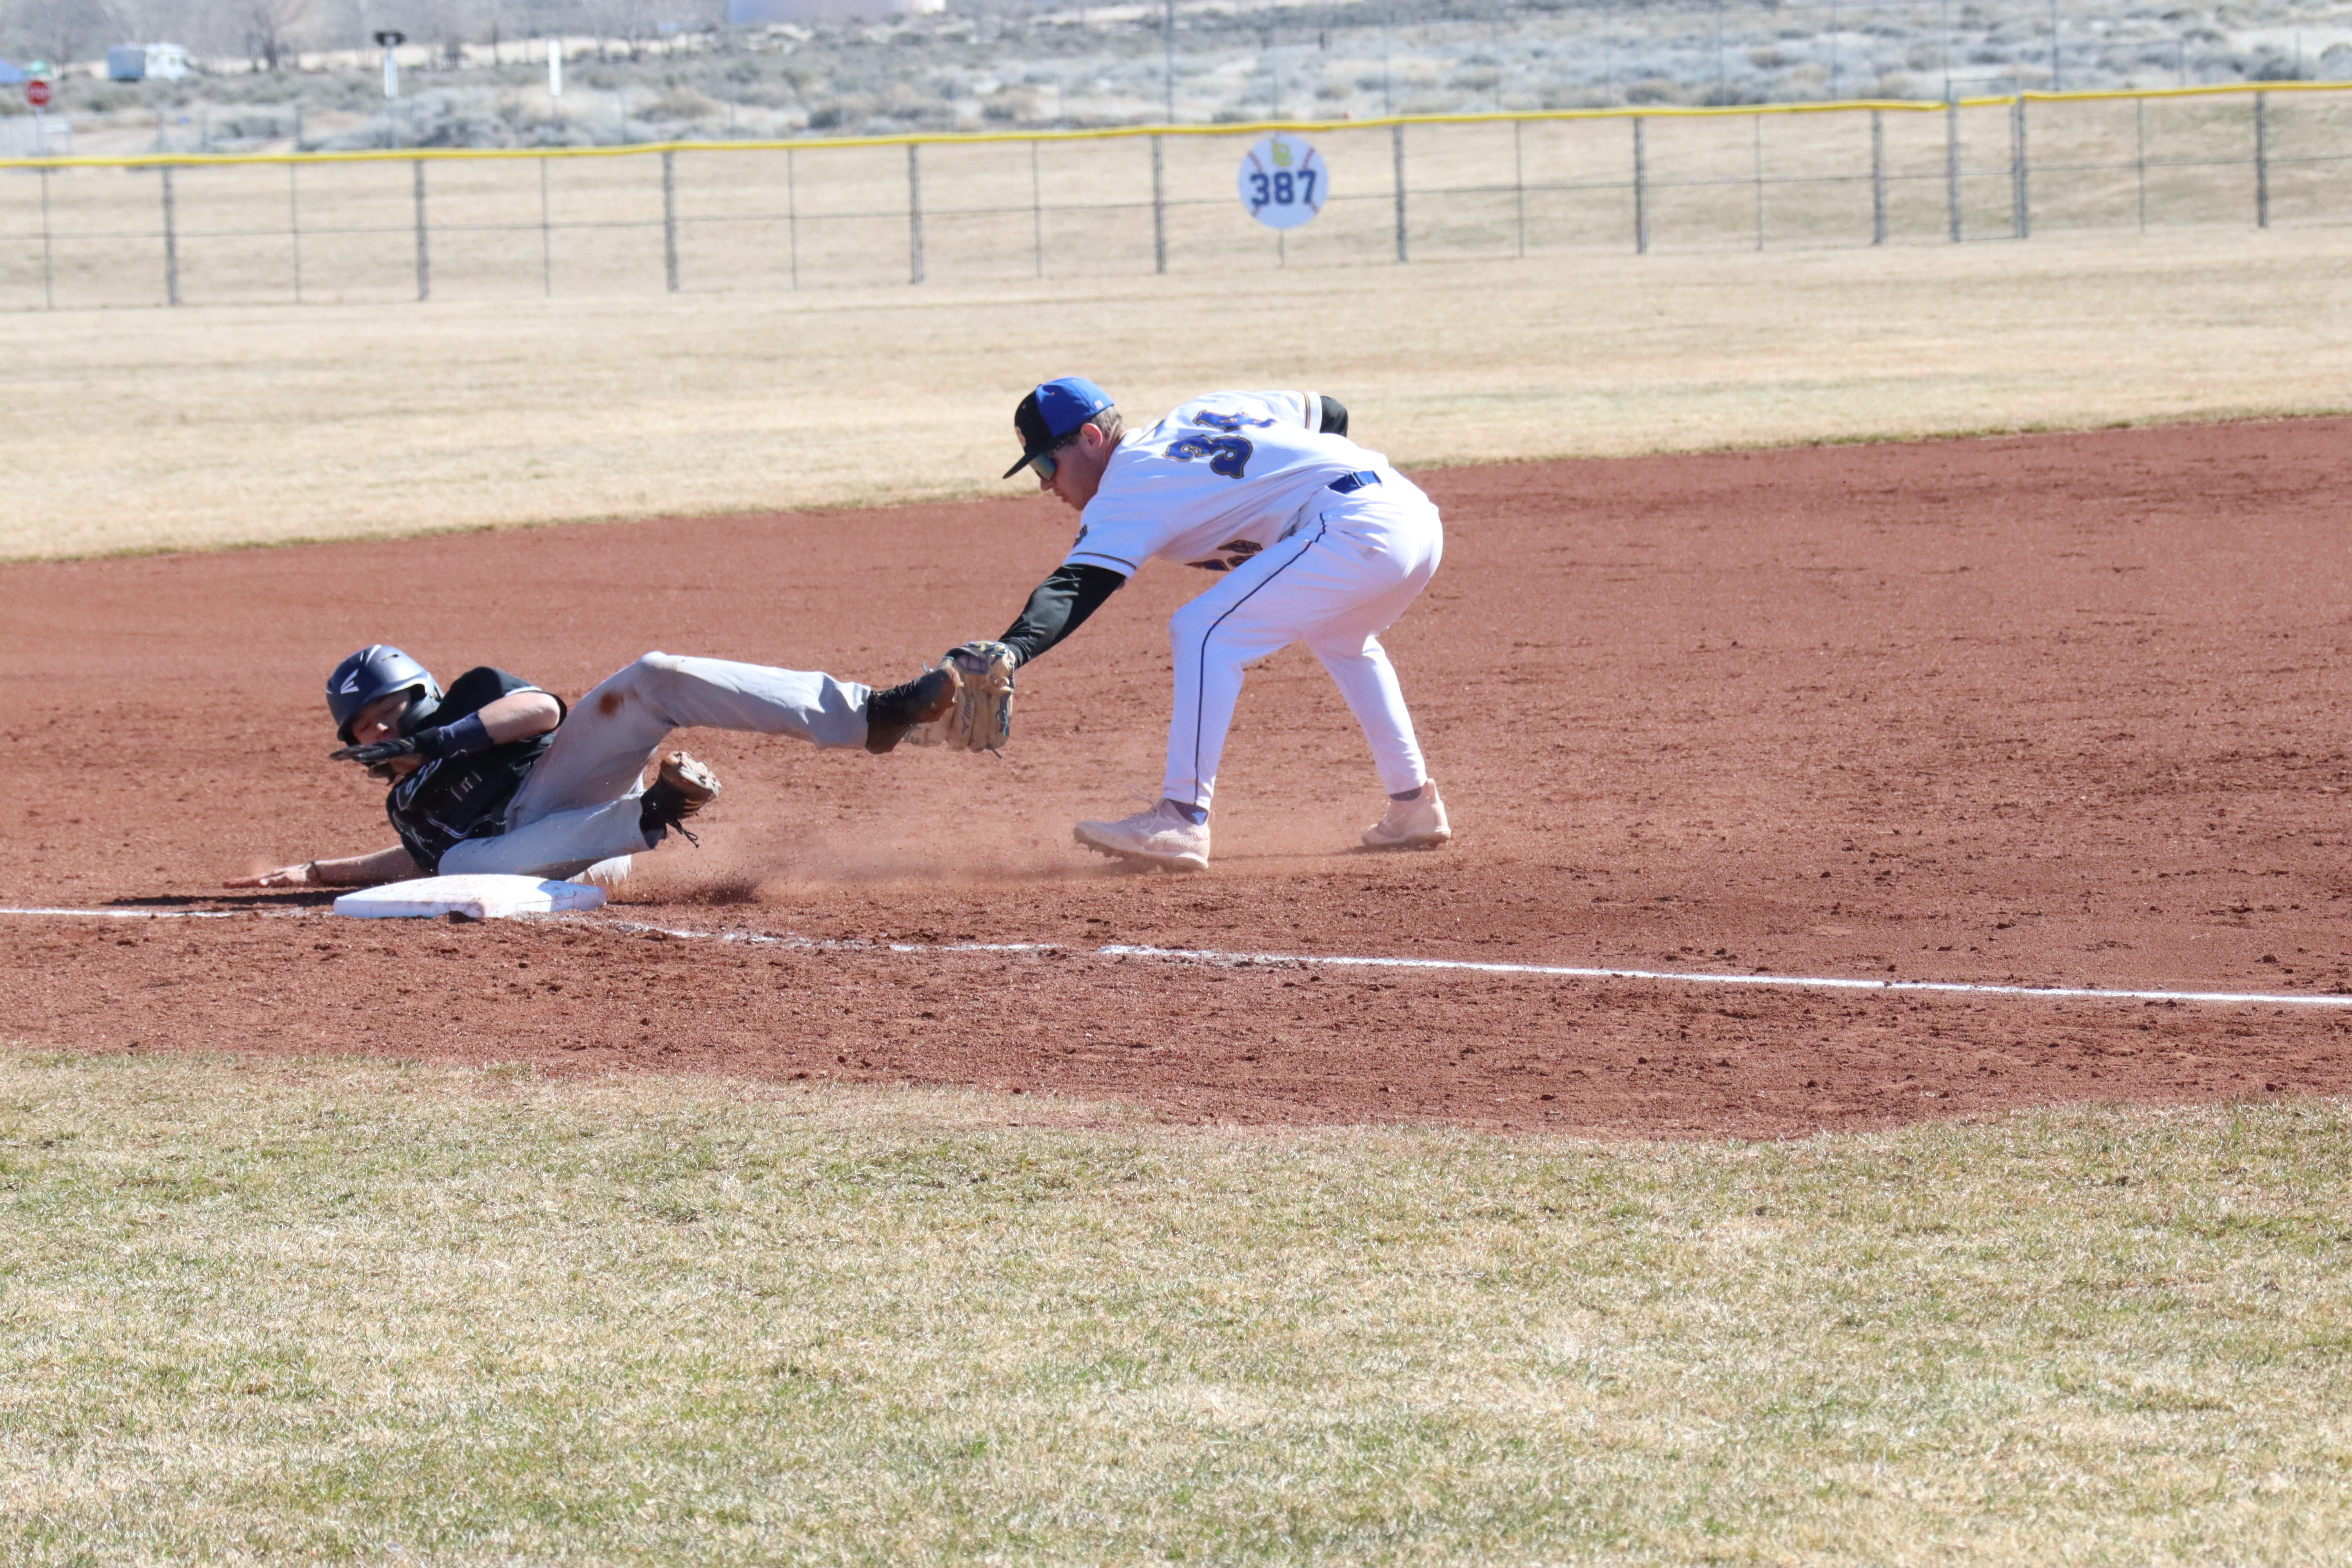 Adam Brooks tags out a runner at third base. /Olivia Espinola • The Brand